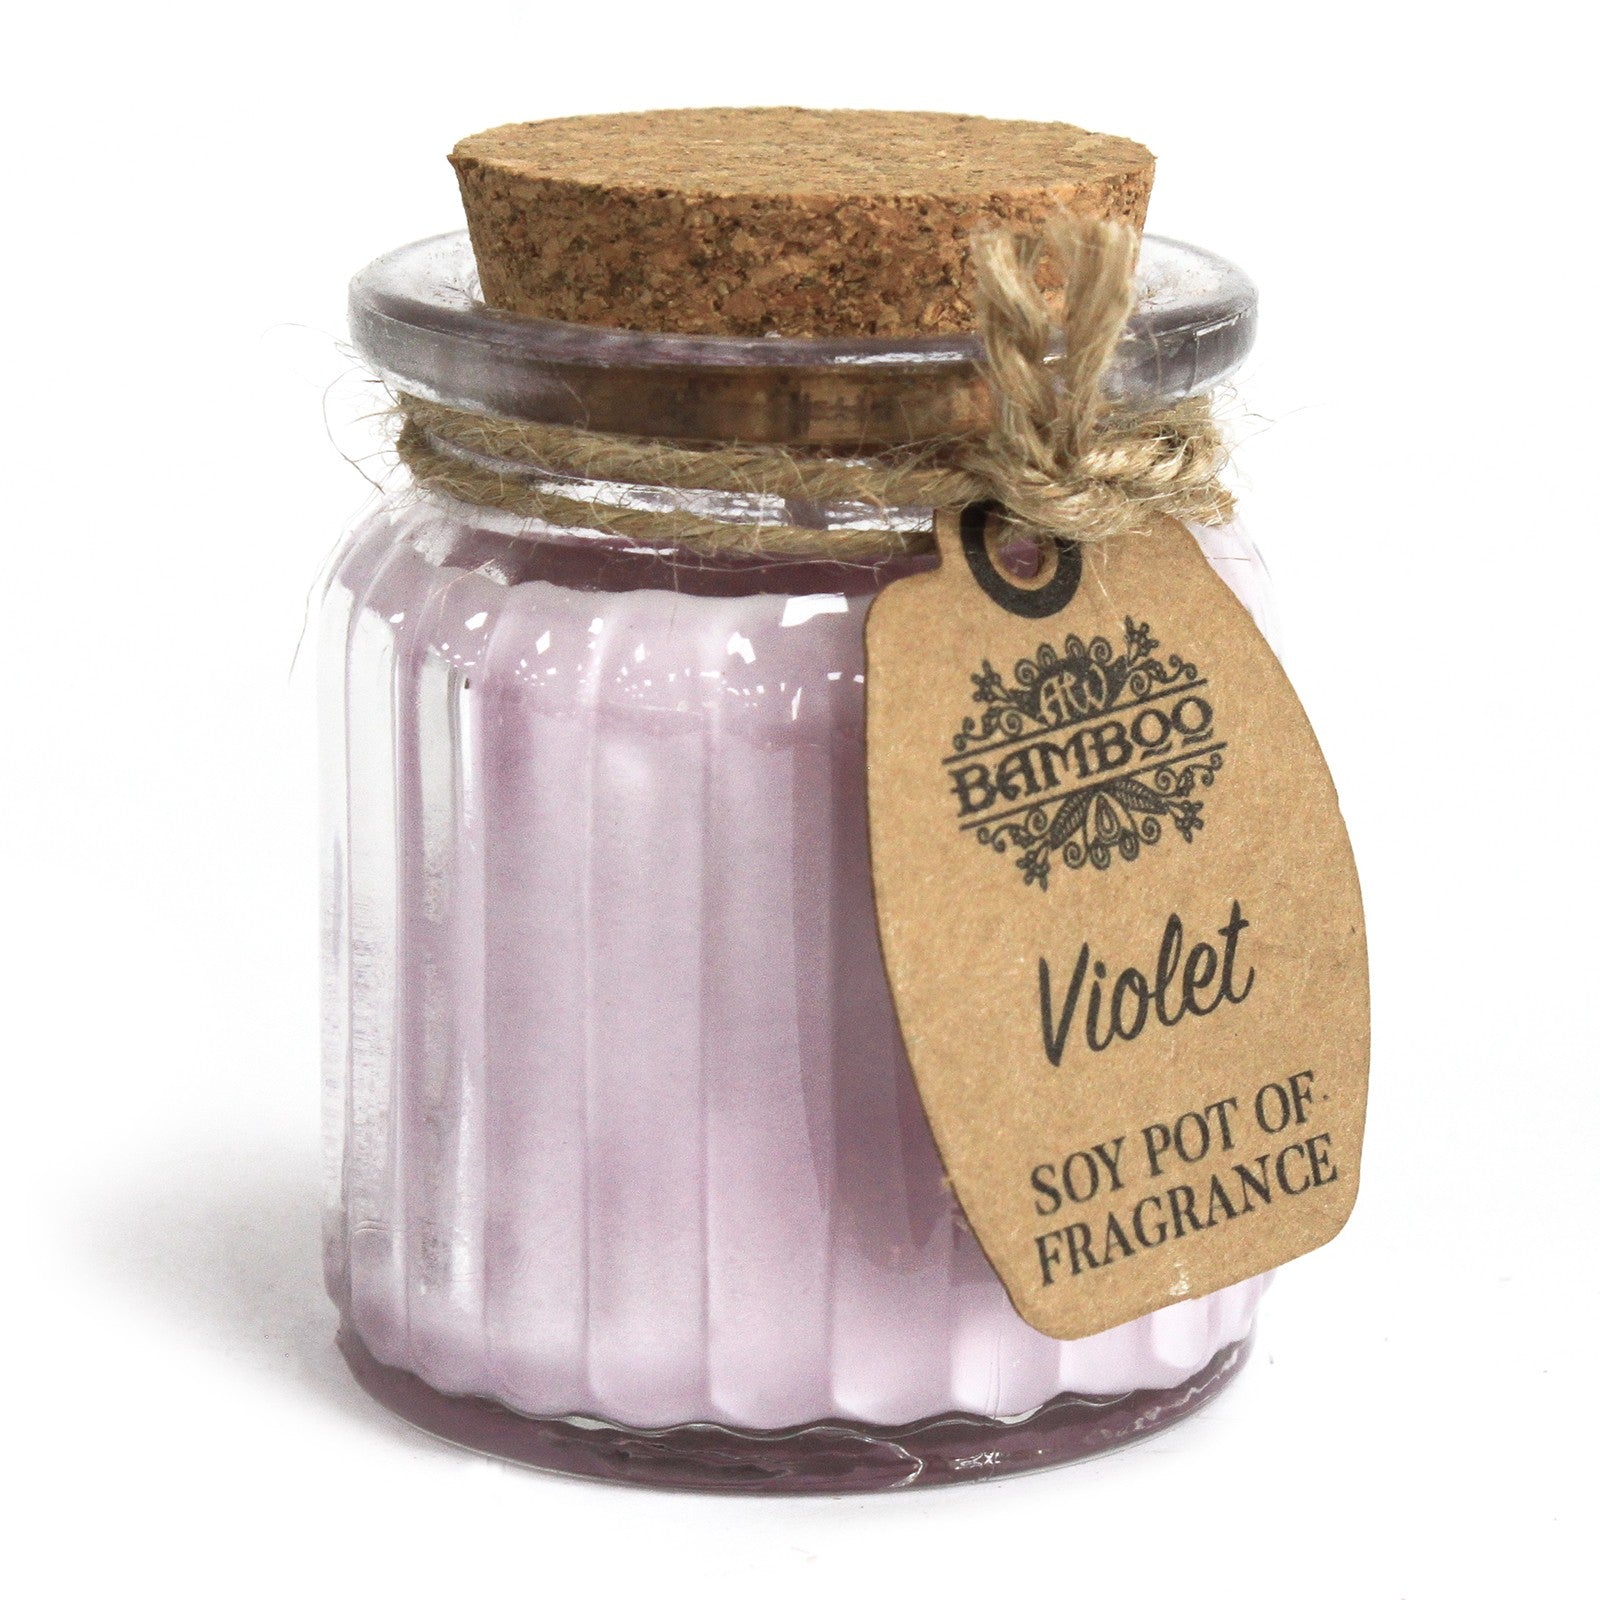 View Violet Soy Pot of Fragrance Candles information